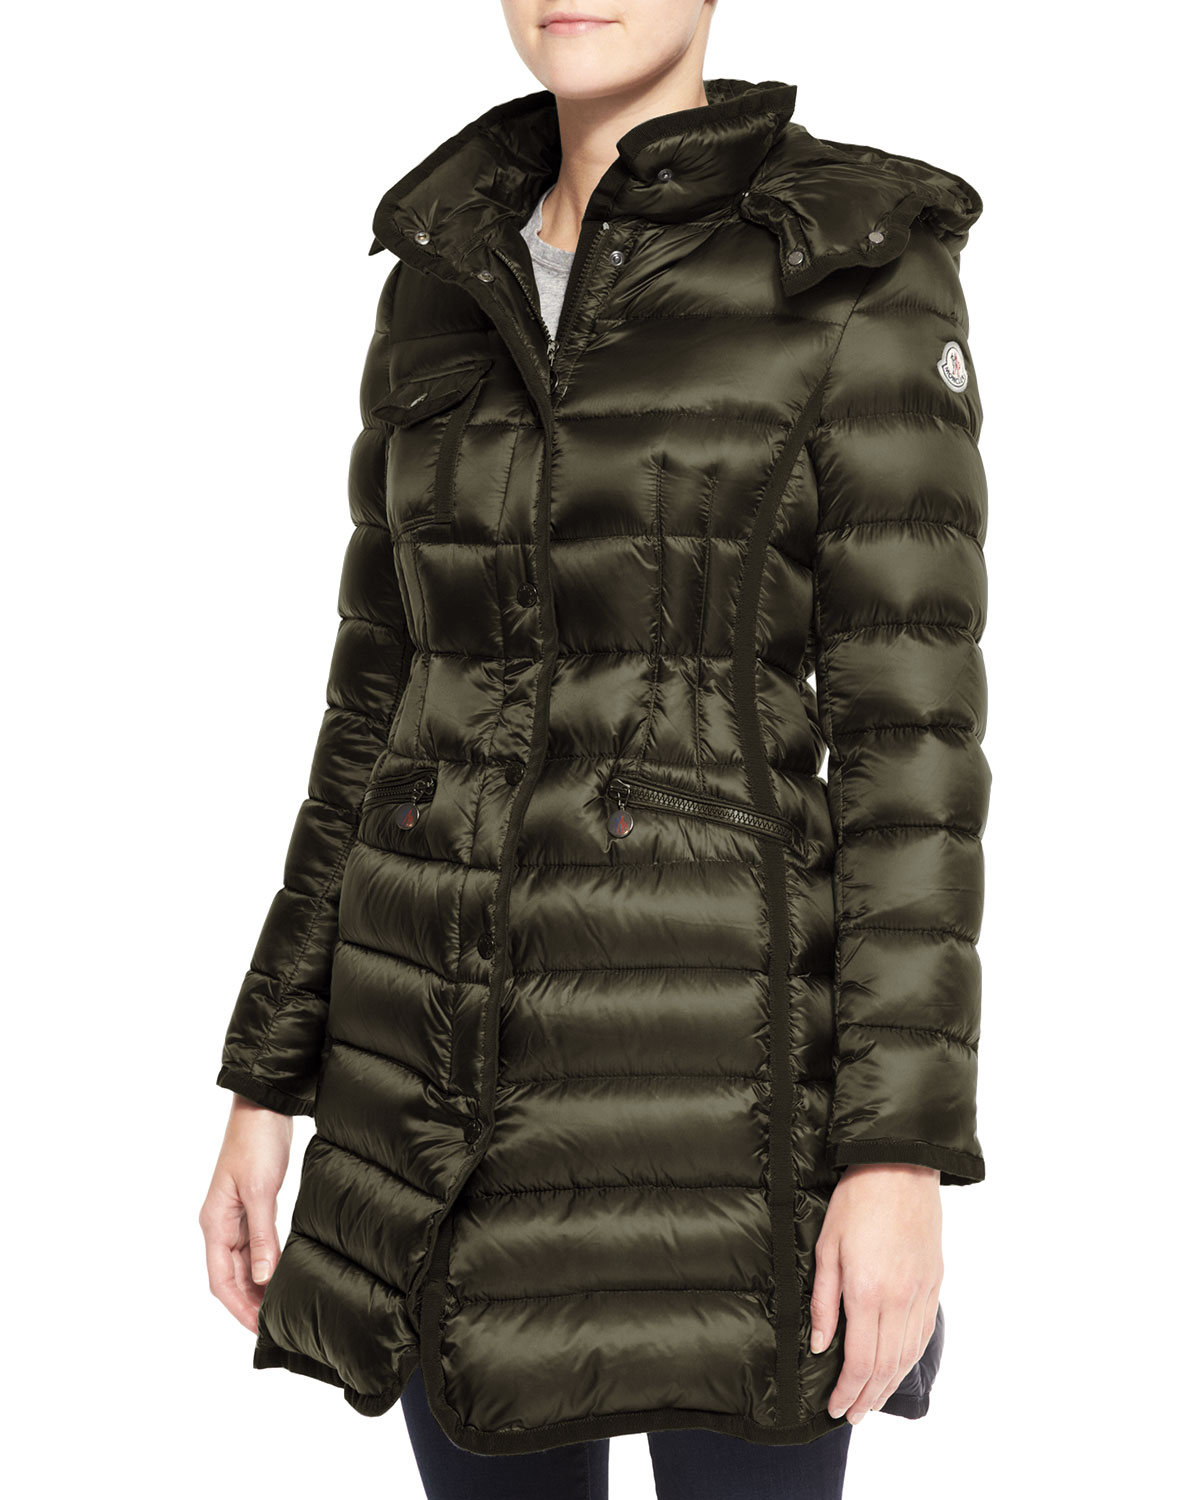 Lyst - Moncler Hooded Long Puffer Coat in Green